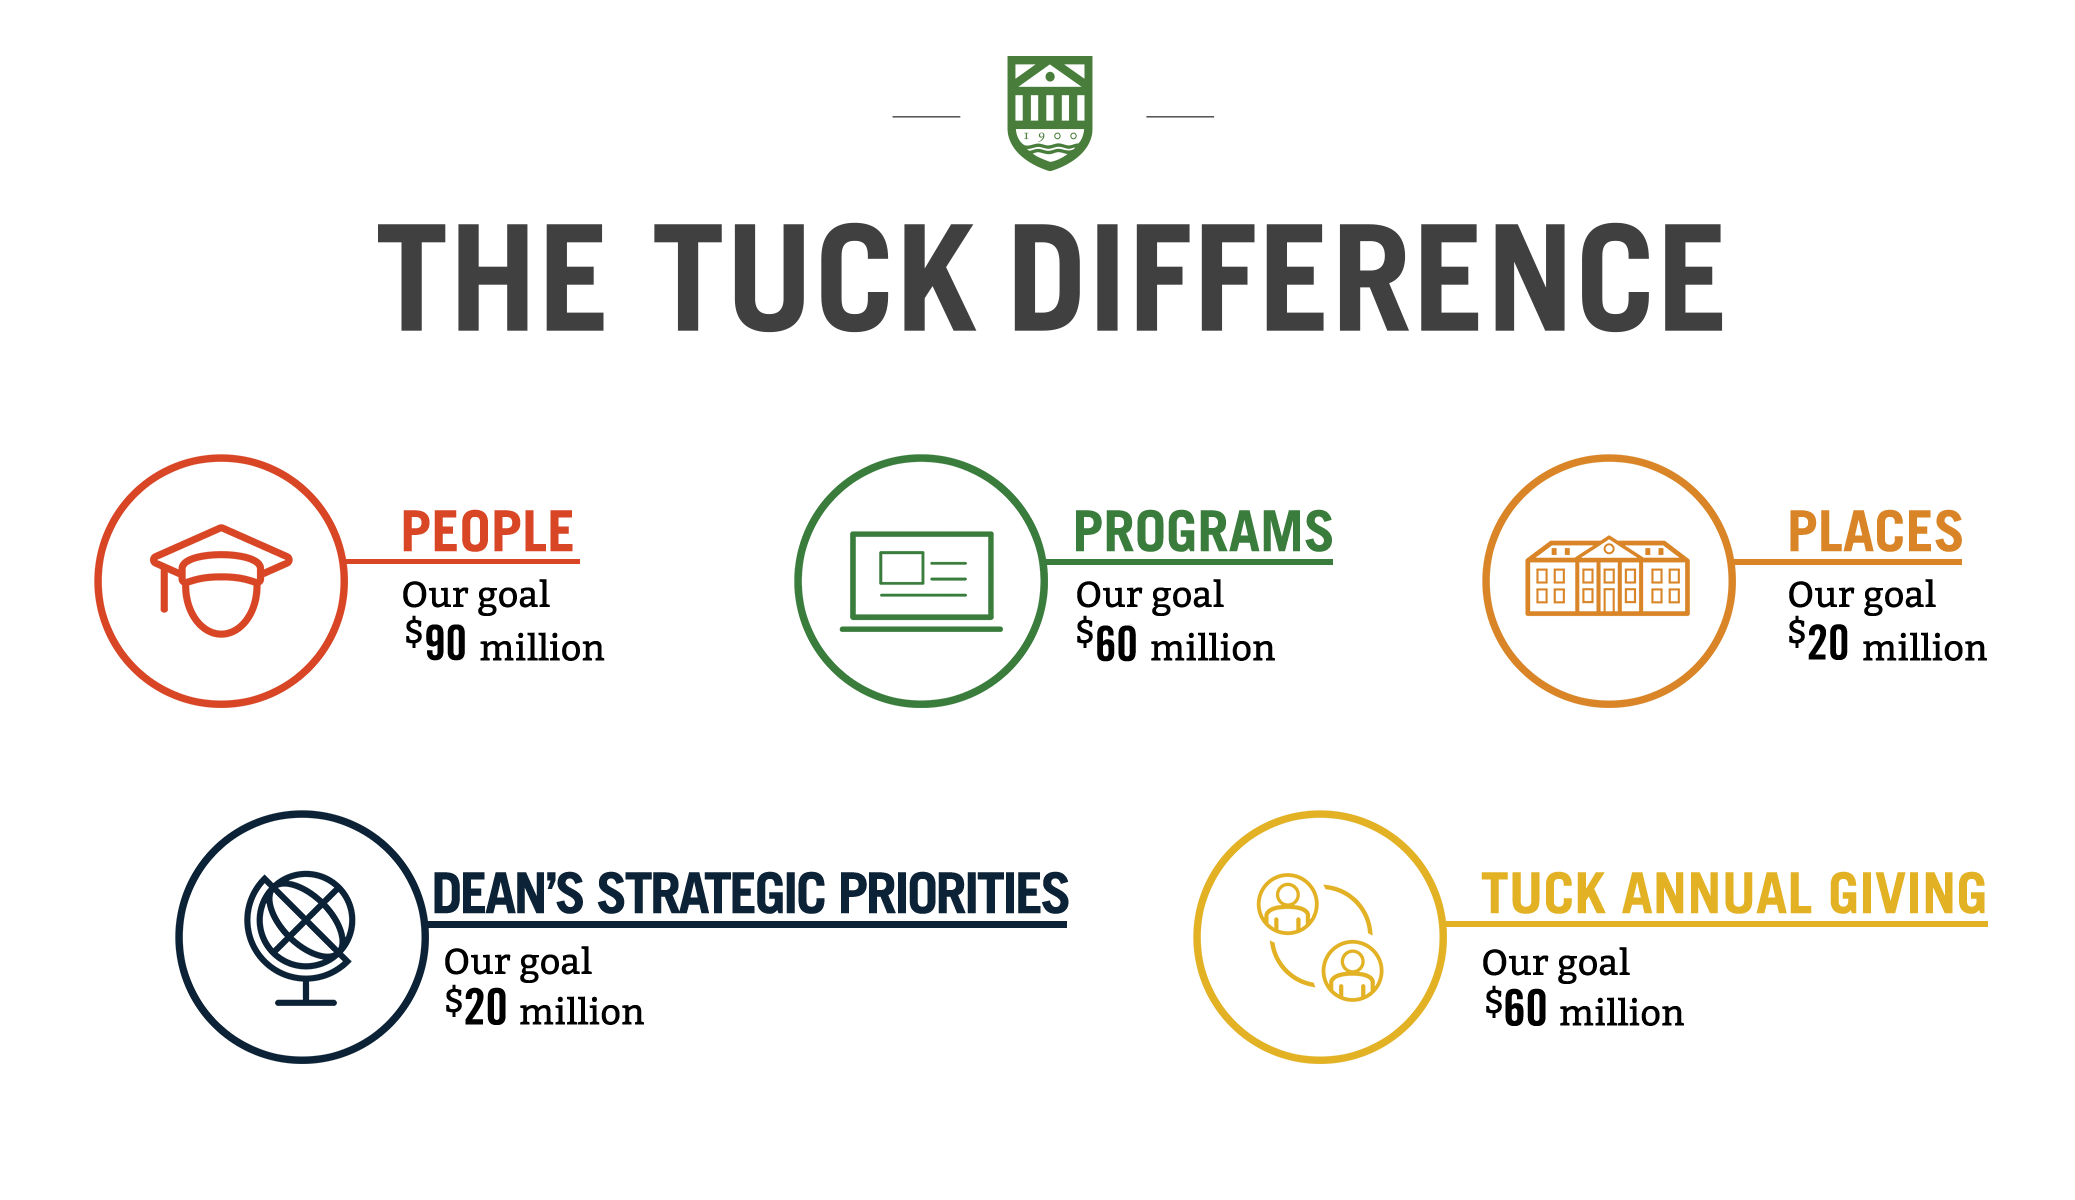 Tuck Capital Campaign infographic